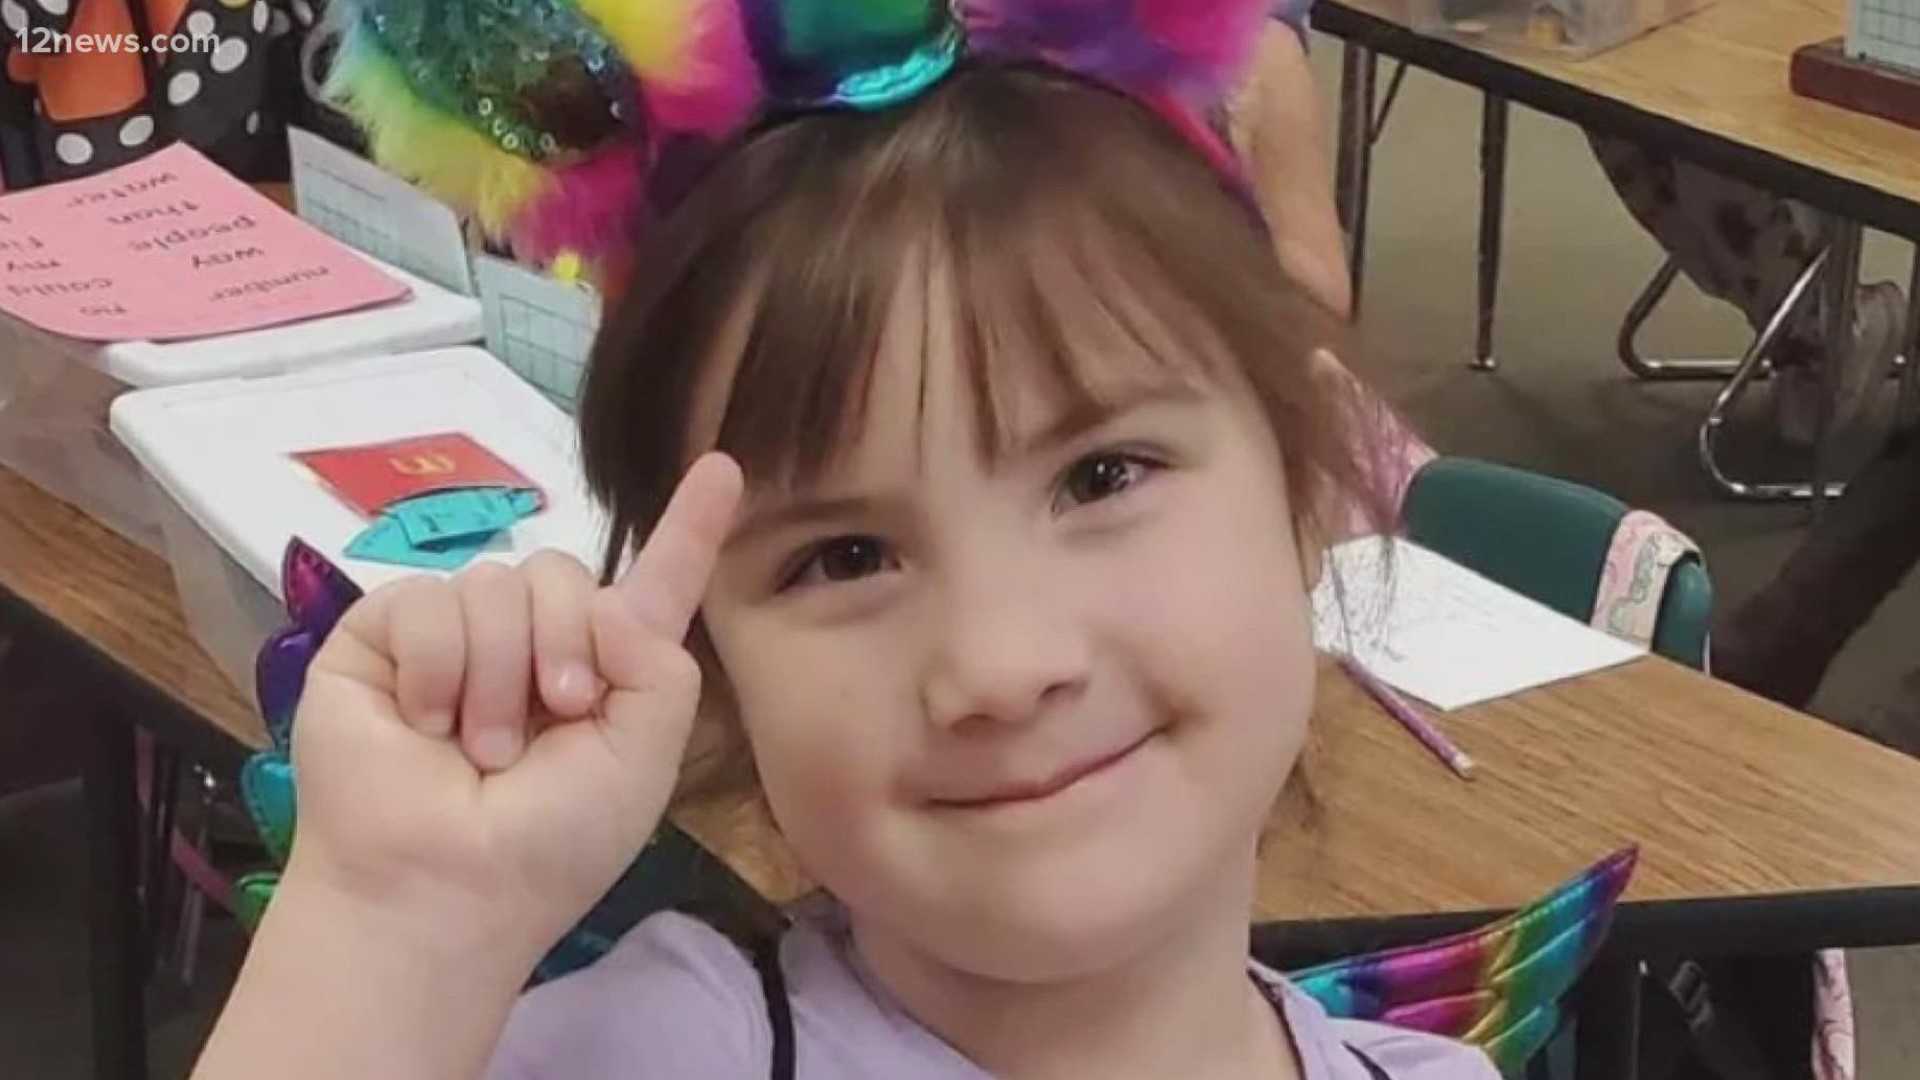 A Valley family that struggled through the pandemic is now facing a bigger challenge as their little girl fights for her life at a Valley hospital.